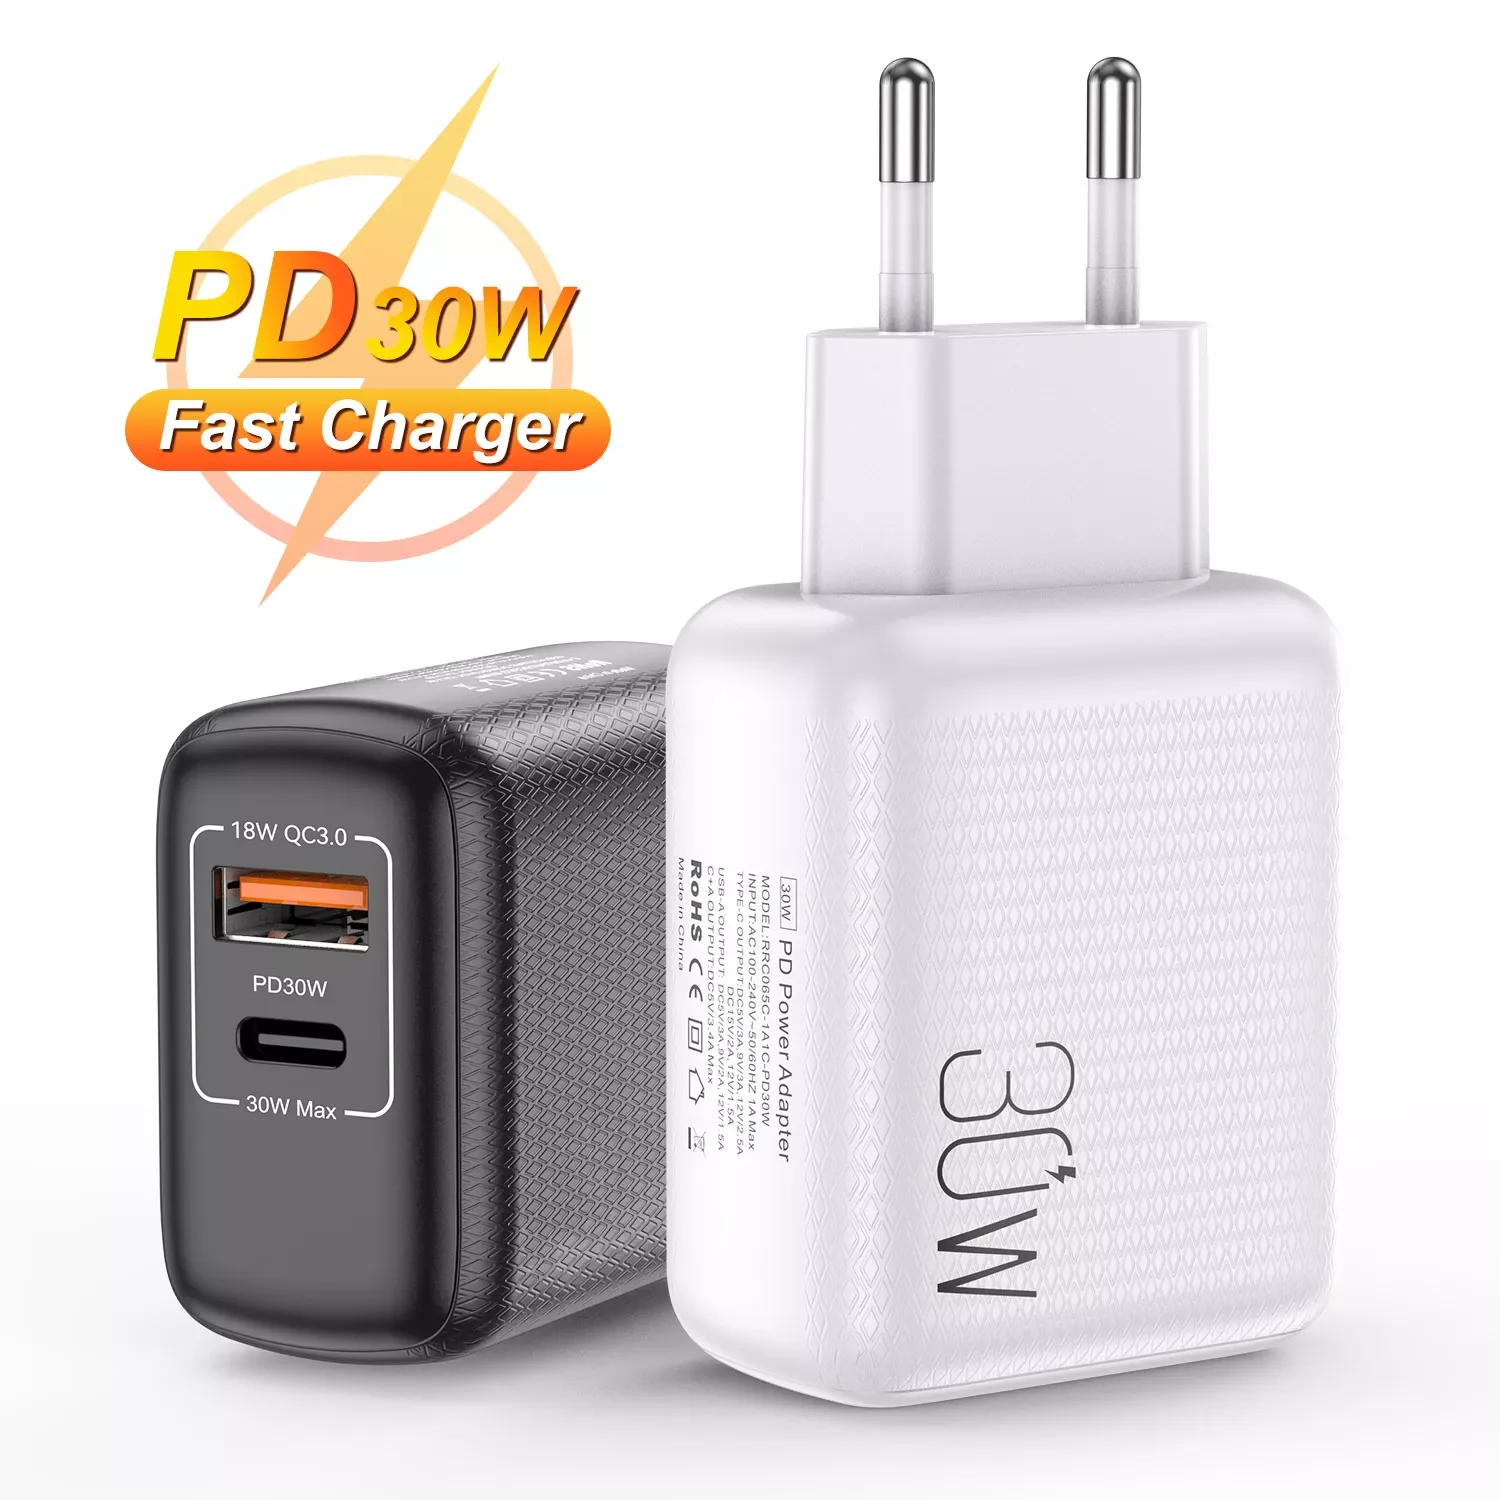 

Ports 30W USB Type C Quick Charge 3.0 QC PD Phone Charger QC3.0 18W PD3.0 Fast Charger For iPhone 13 12 Pro Max Xiaomi Mi 11